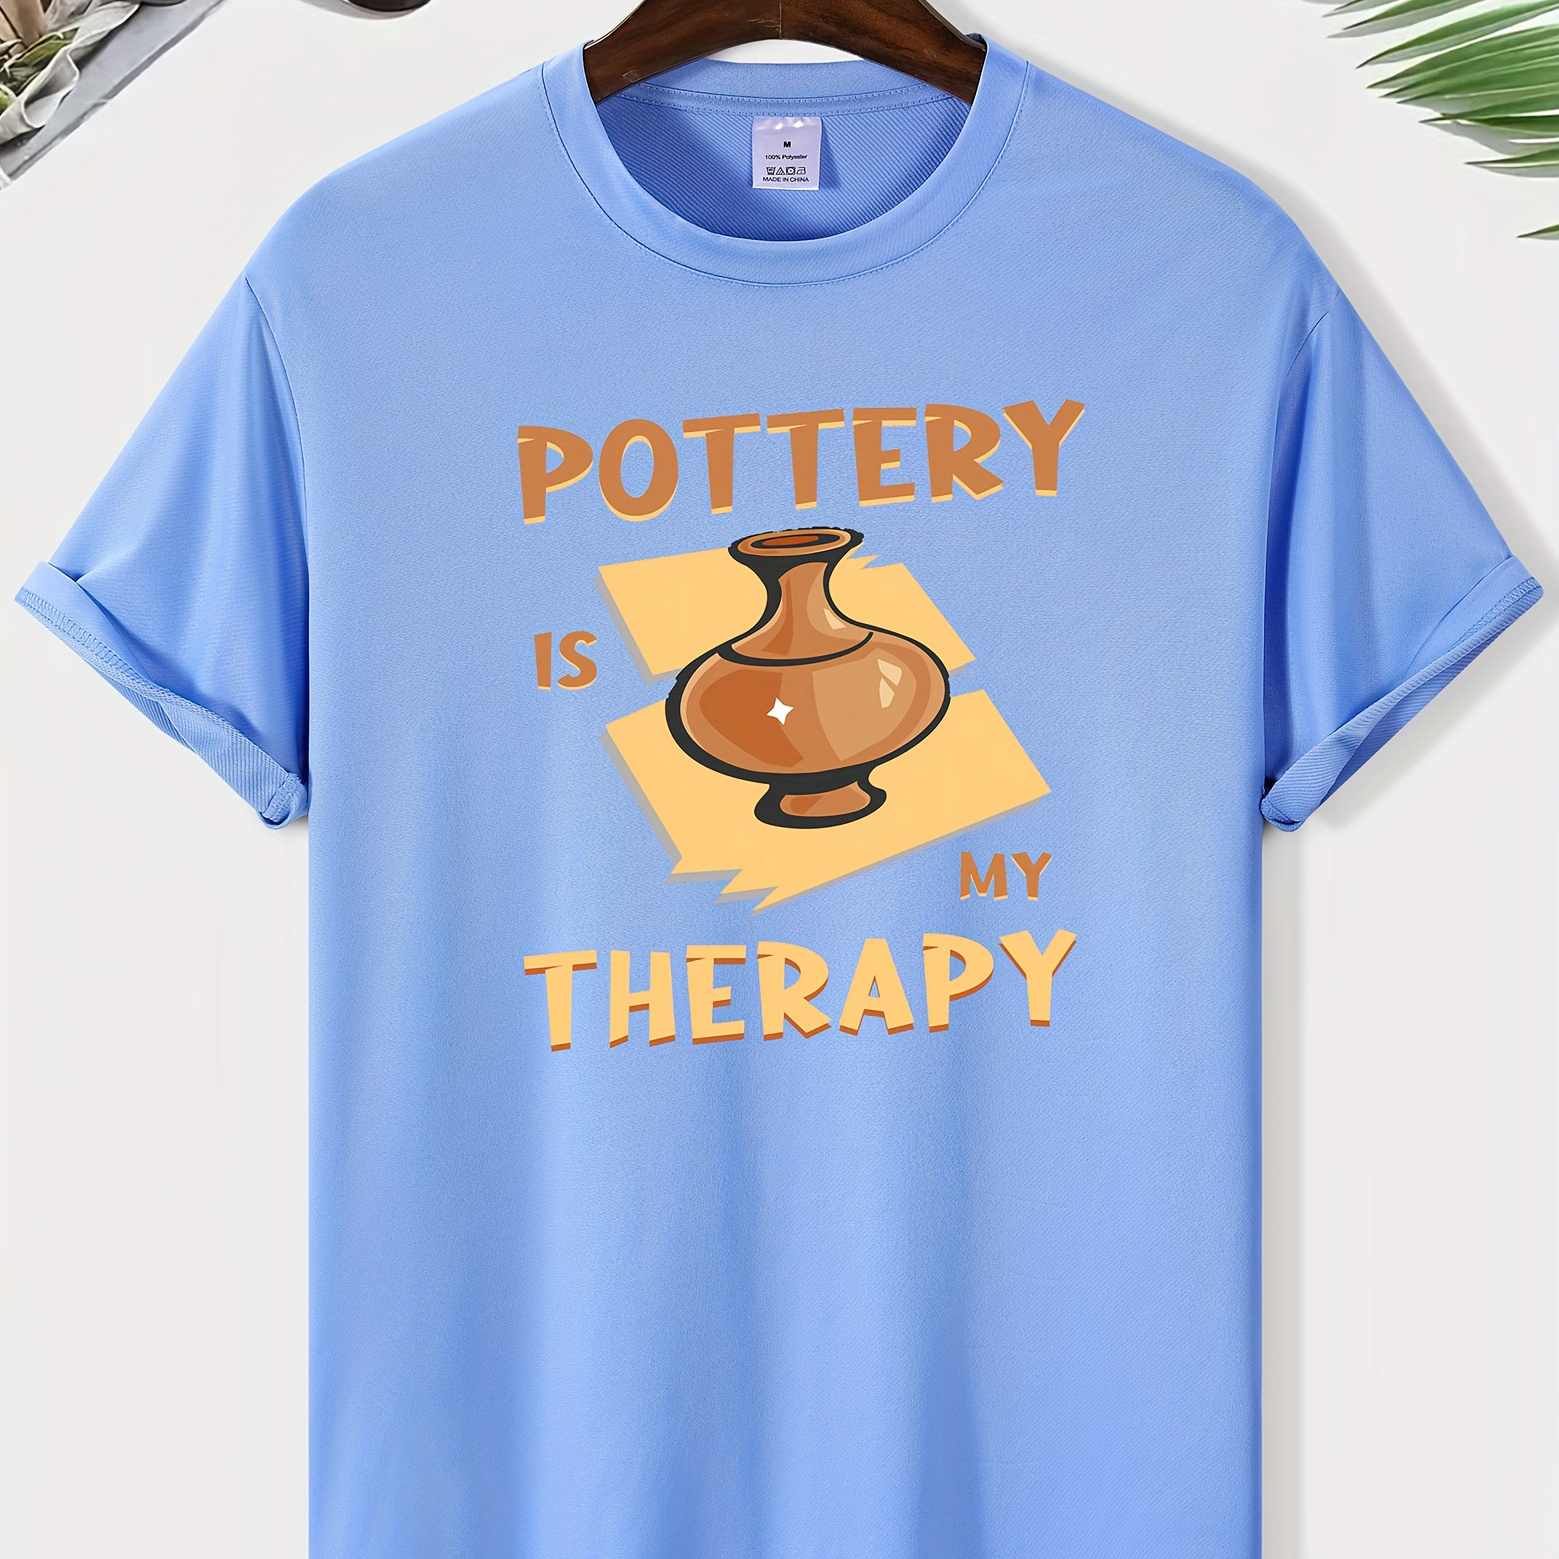 

Pottery Print, Men's Graphic Design Crew Neck T-shirt, Casual Comfy Tees Tshirts For Summer, Men's Clothing Tops For Daily Vacation Resorts